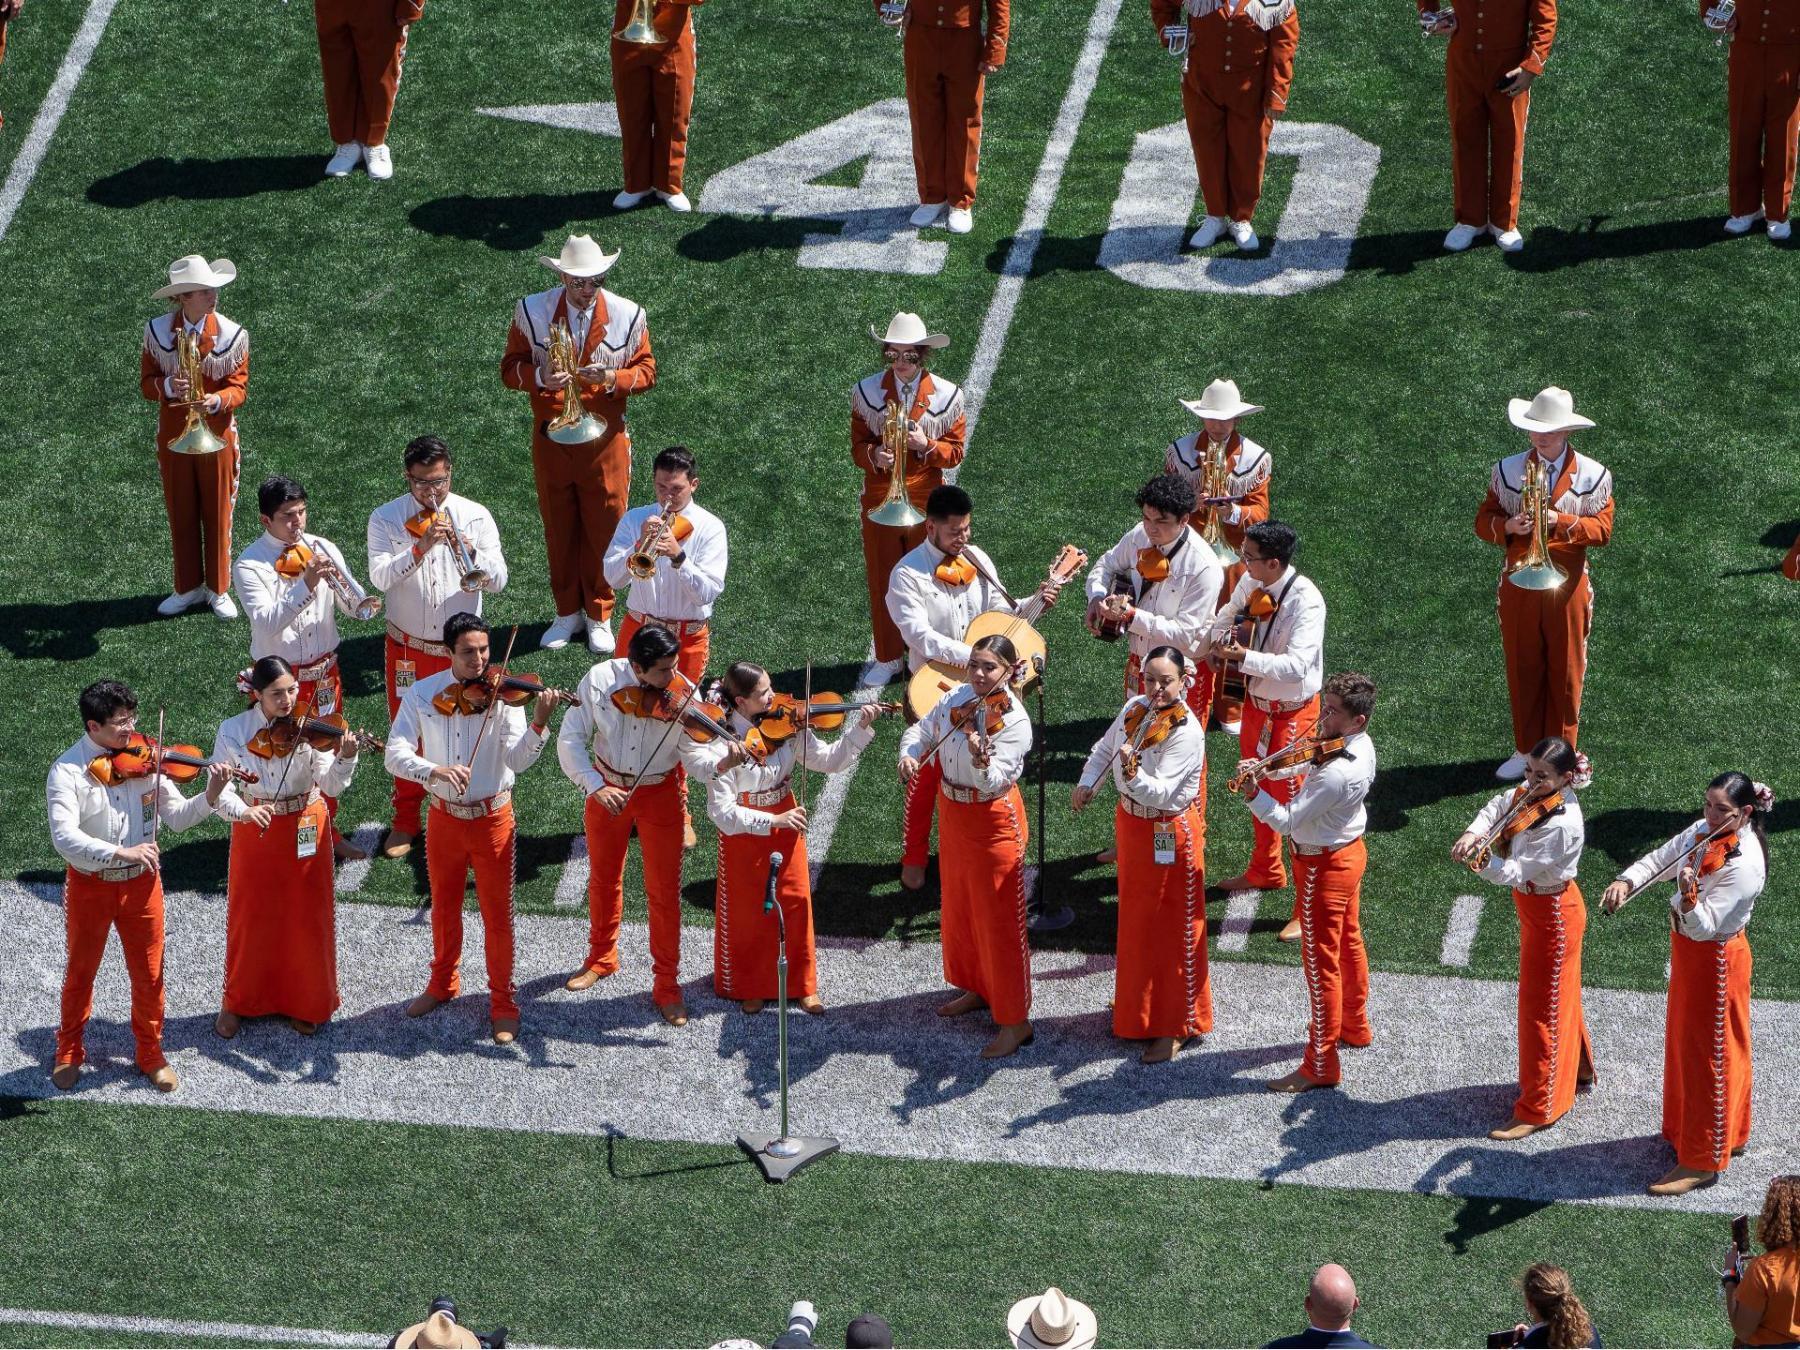 Texas Mariachi Paredes performed with the Longhorn Band during the halftime show of the Texas-Texas Tech football game on Sept. 25, 2021